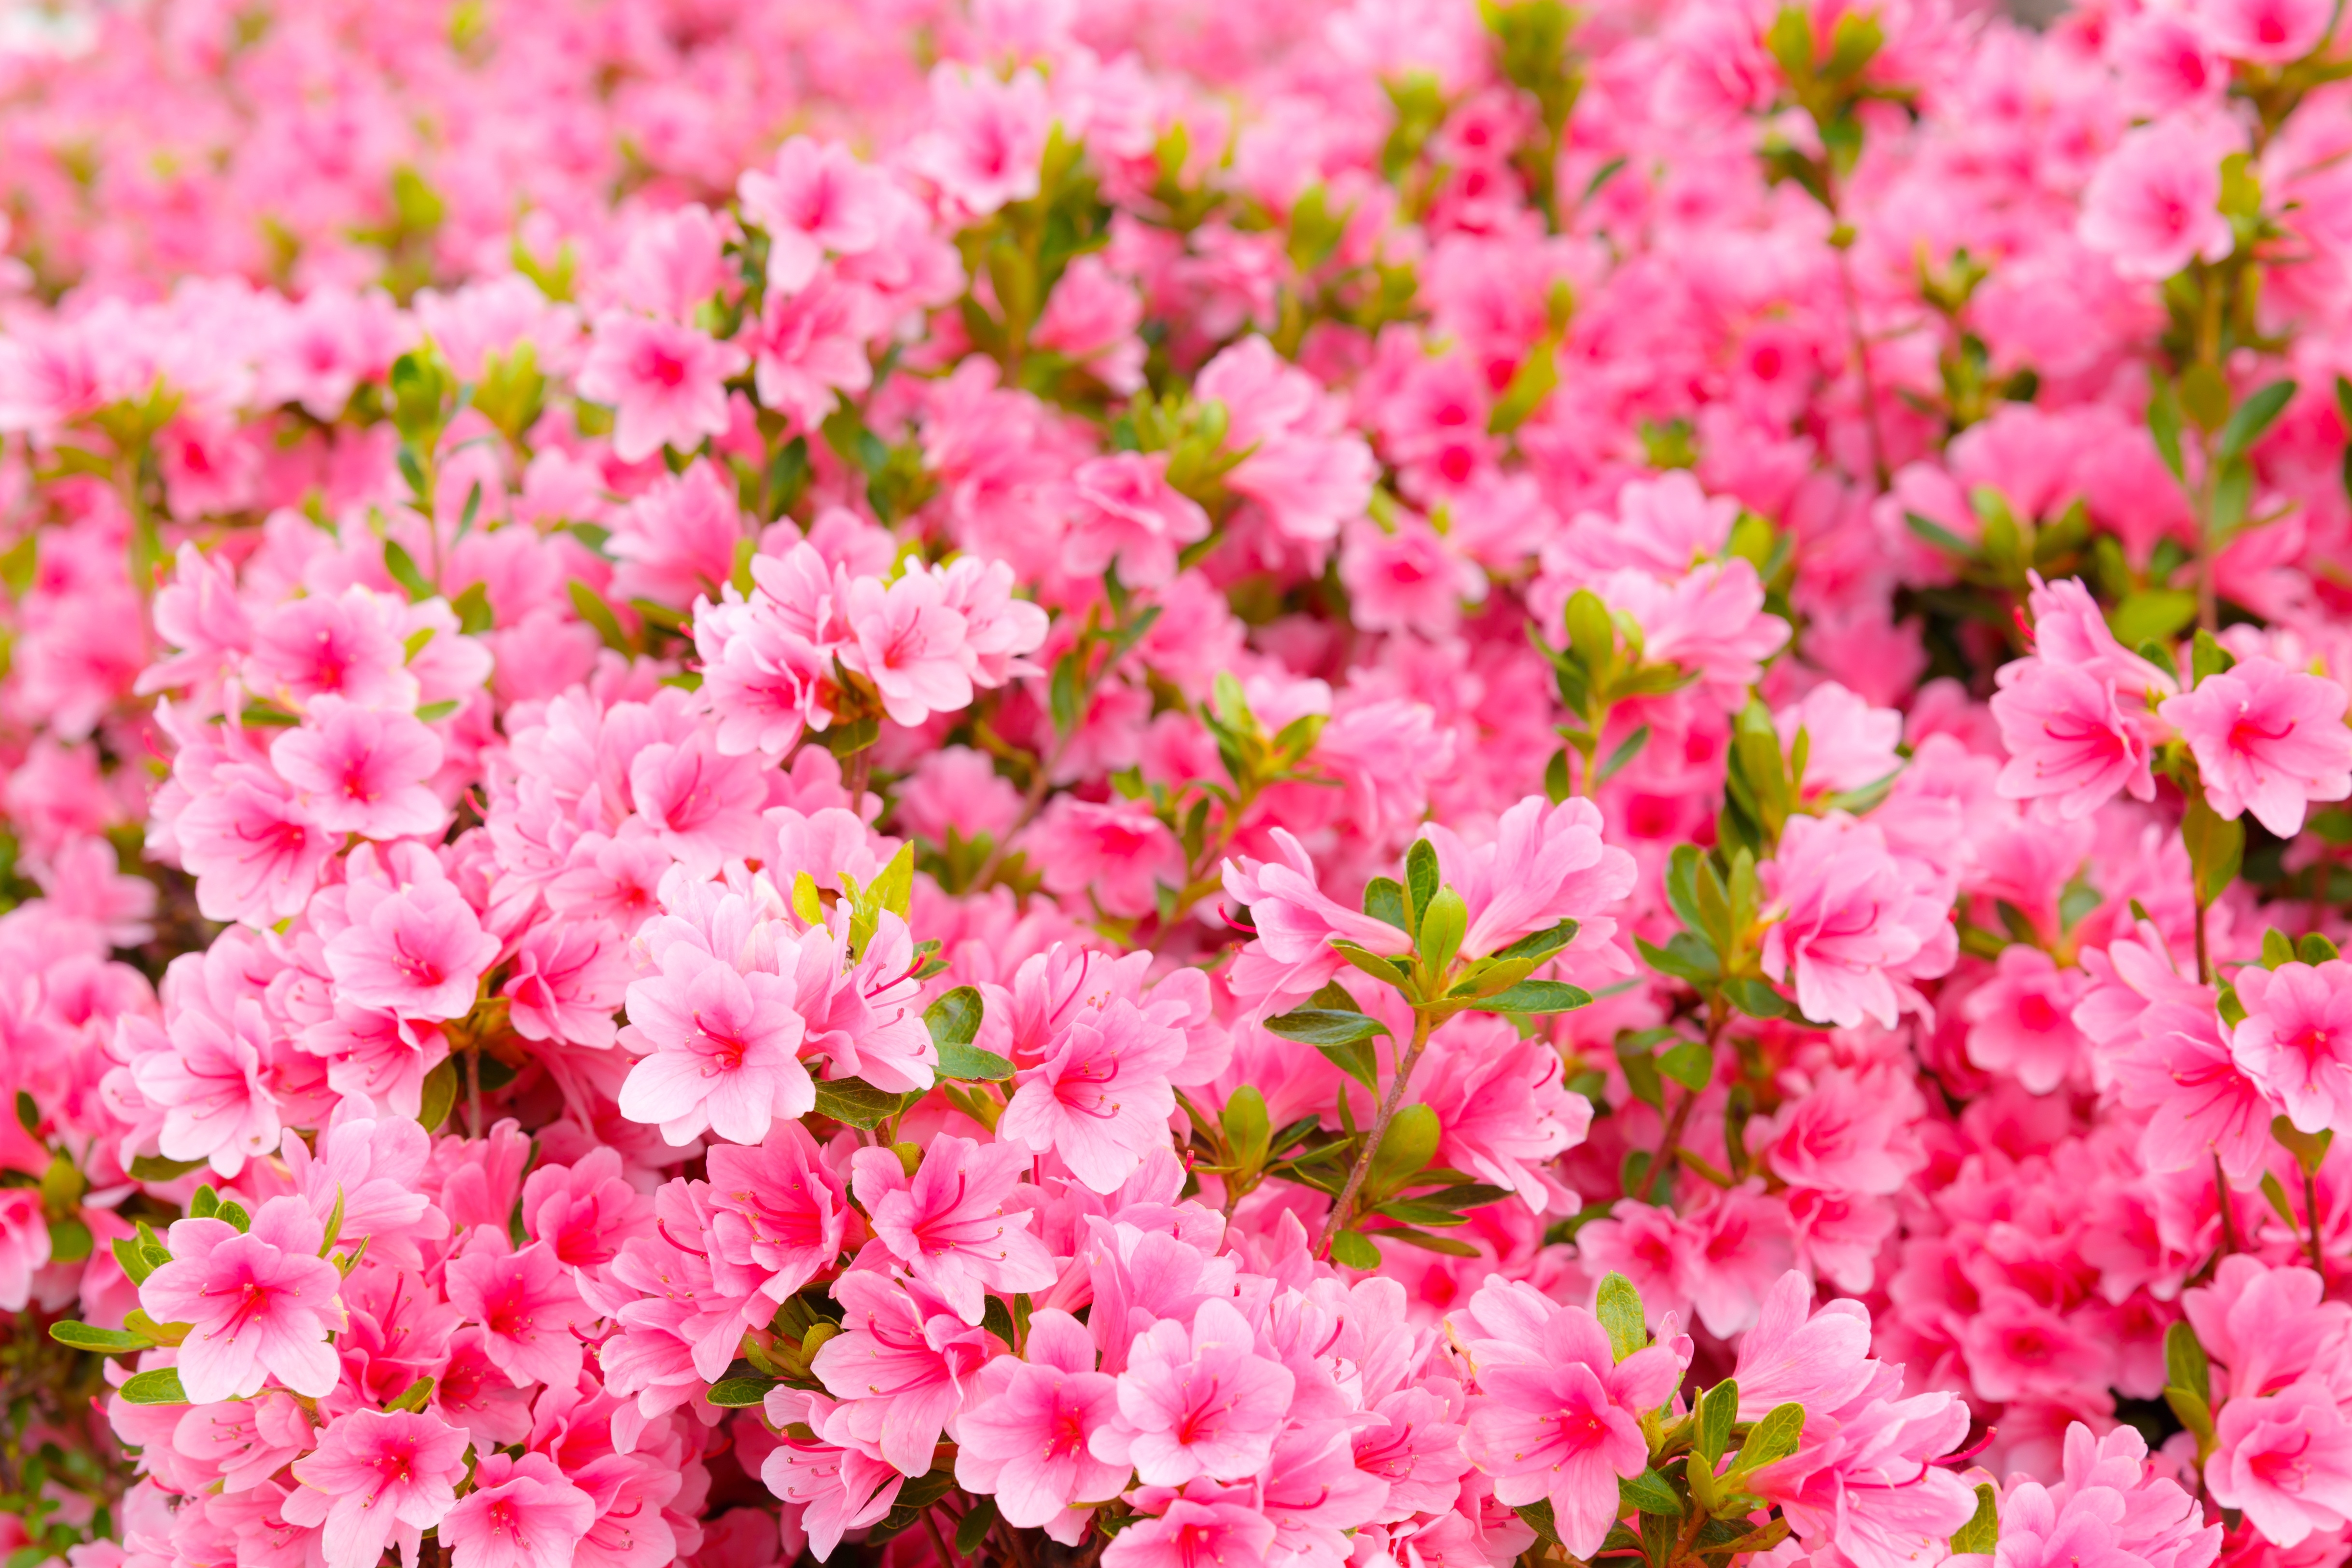 Free photo A field of pink flowers